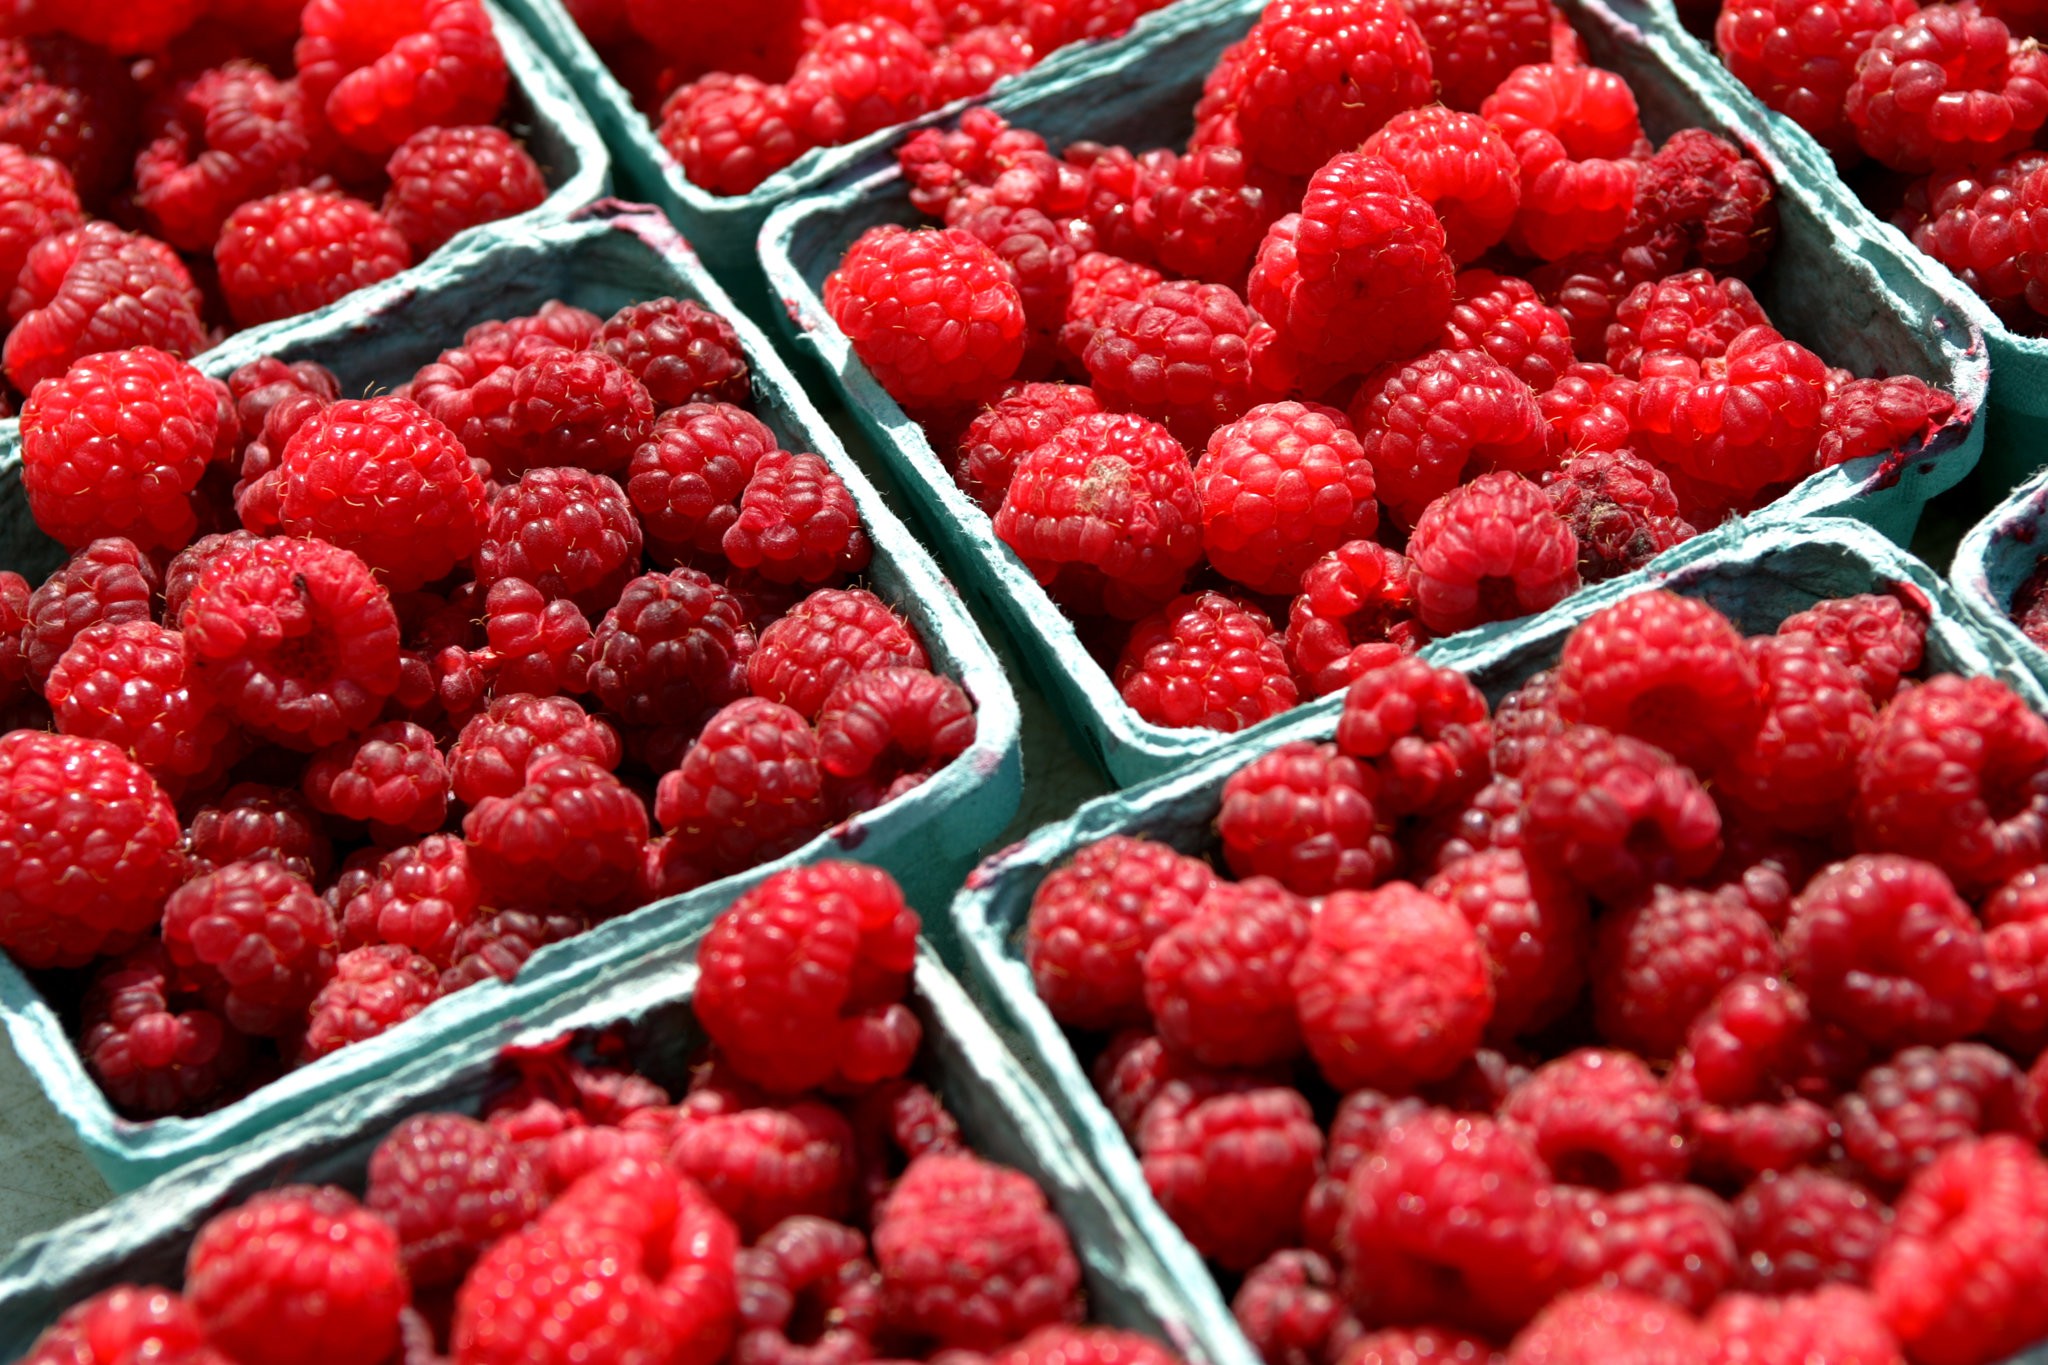 Some farmers in upstate New York have given up on raspberries after uncontrollable waves of the spotted wing Drosophila, a fruit fly whose larvae can turn berries to mush. Credit Jessica Ebelhar/The New York Times